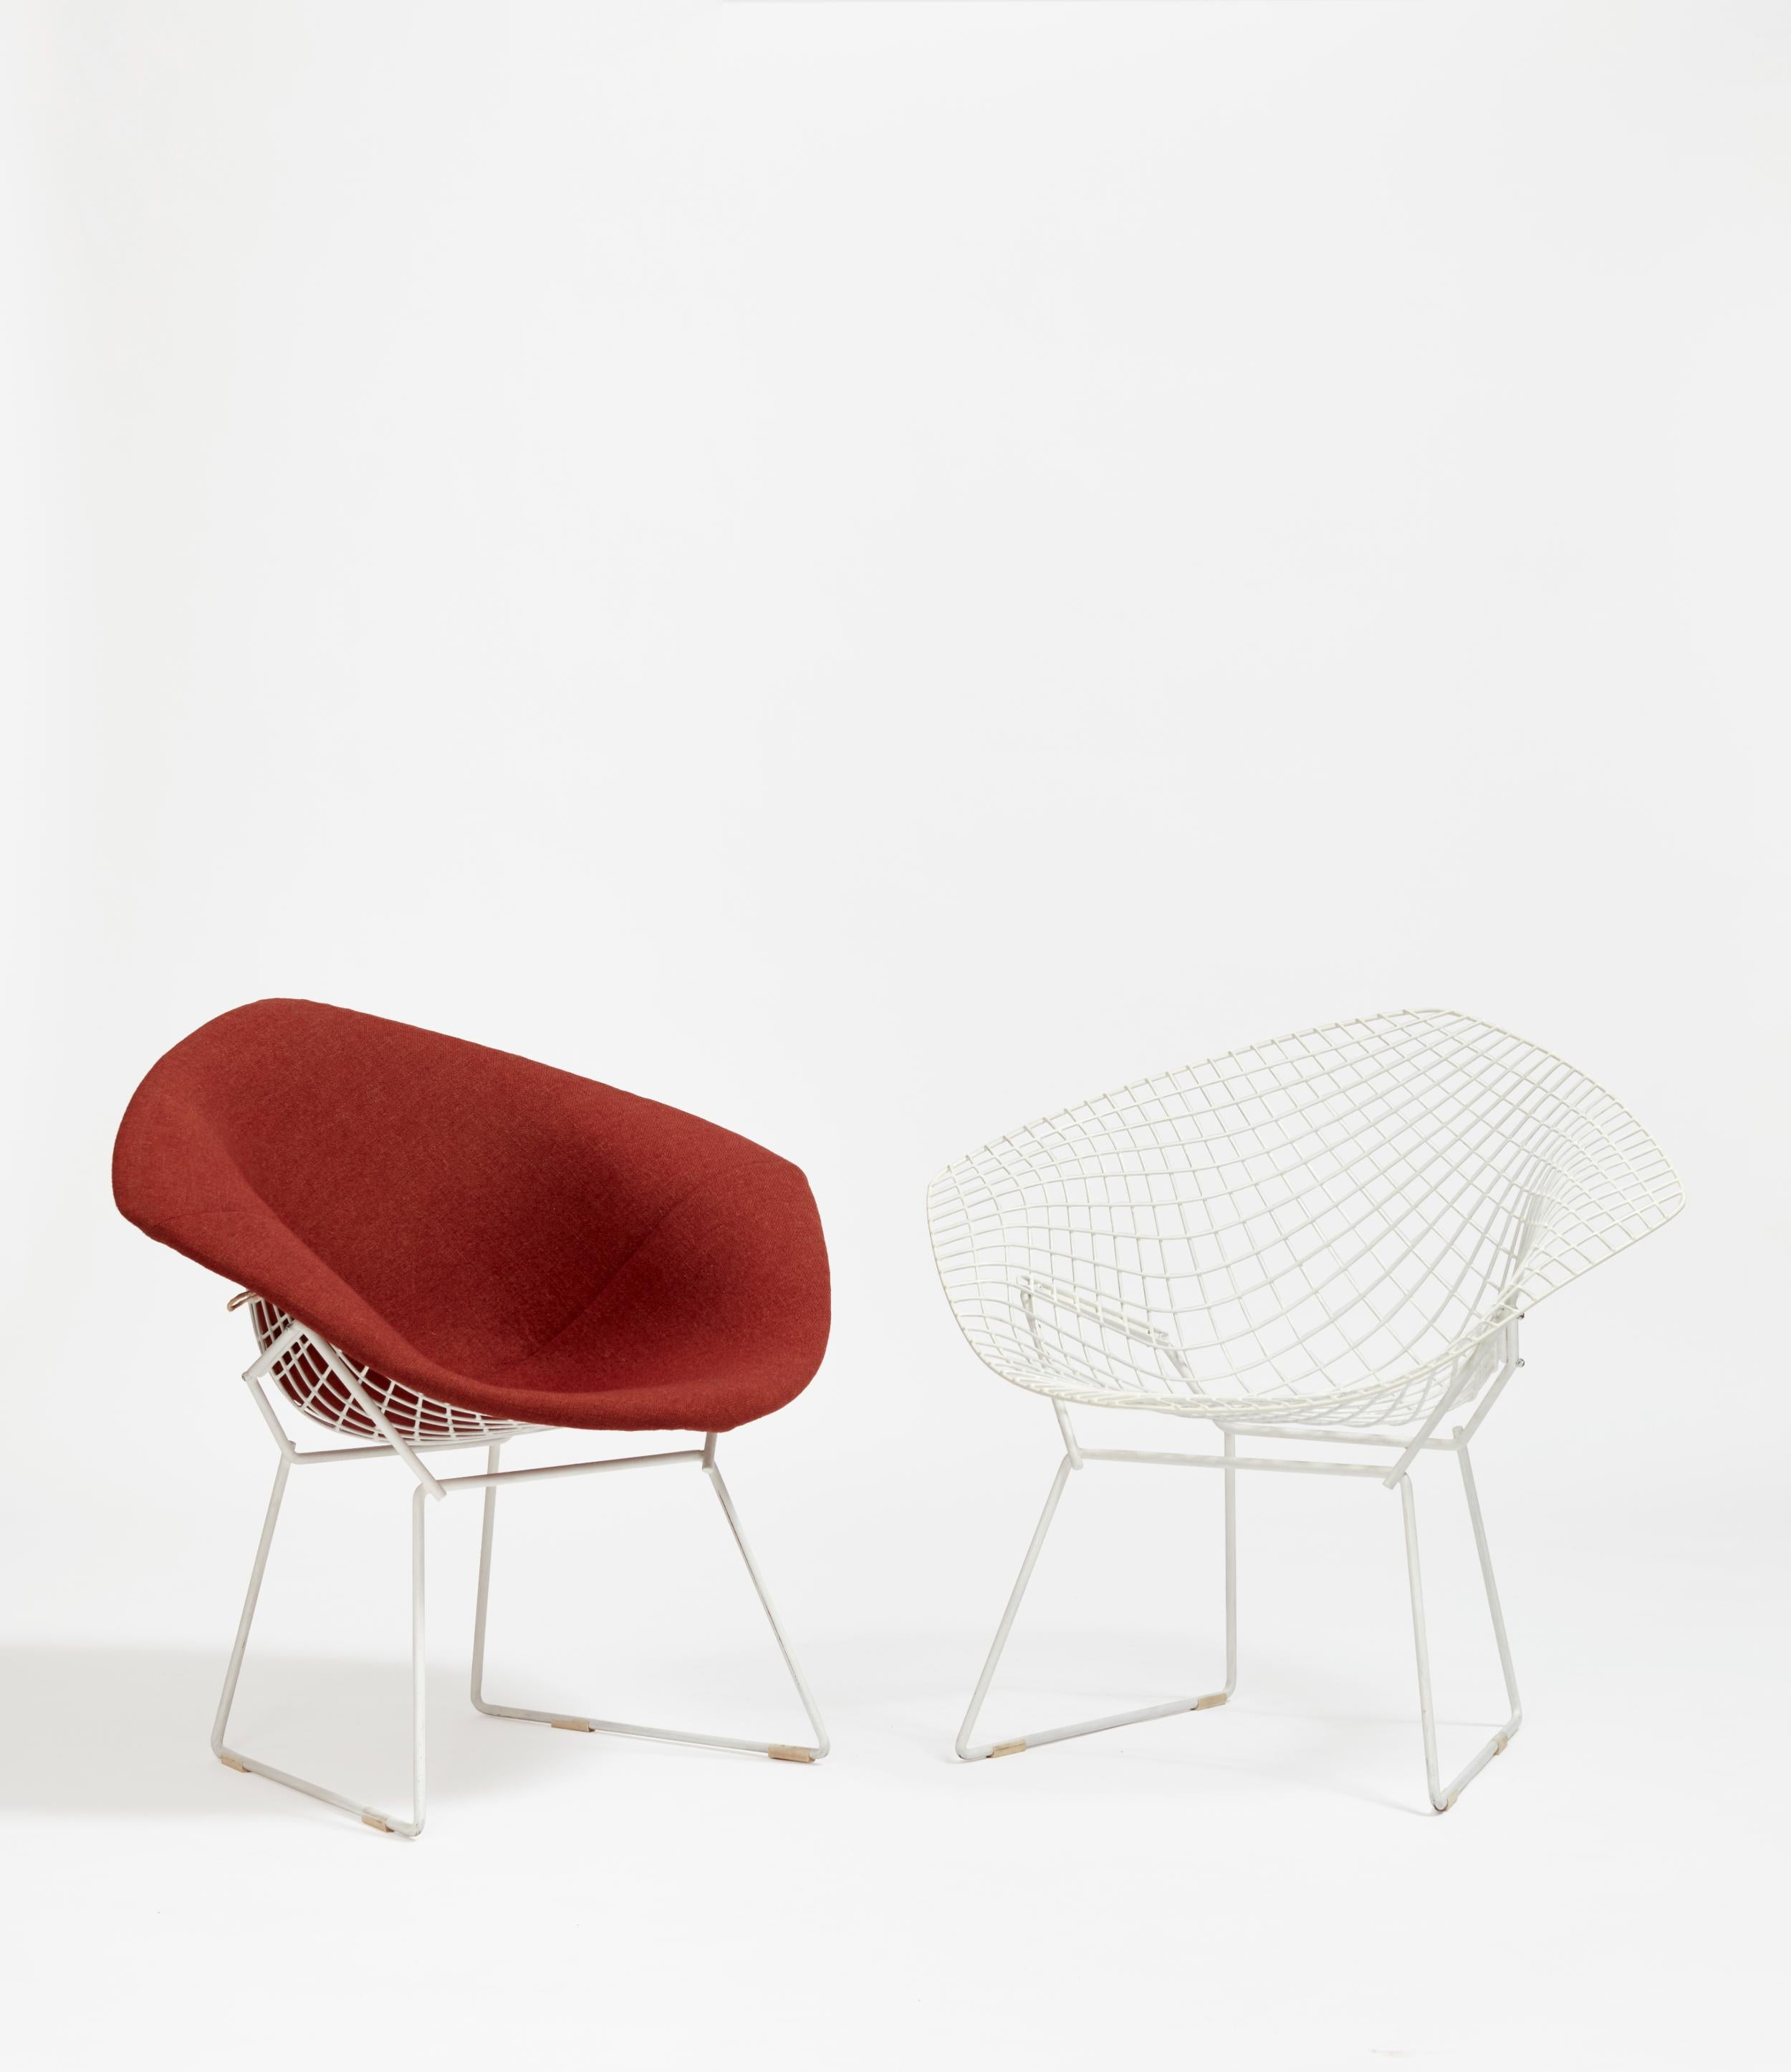 Using industrial material while elevating the chair to the status of an art-work, Bertoia cemented the conversation around utility and aesthetics within the context of furniture design. The slanted angle of the seat invites investigation around